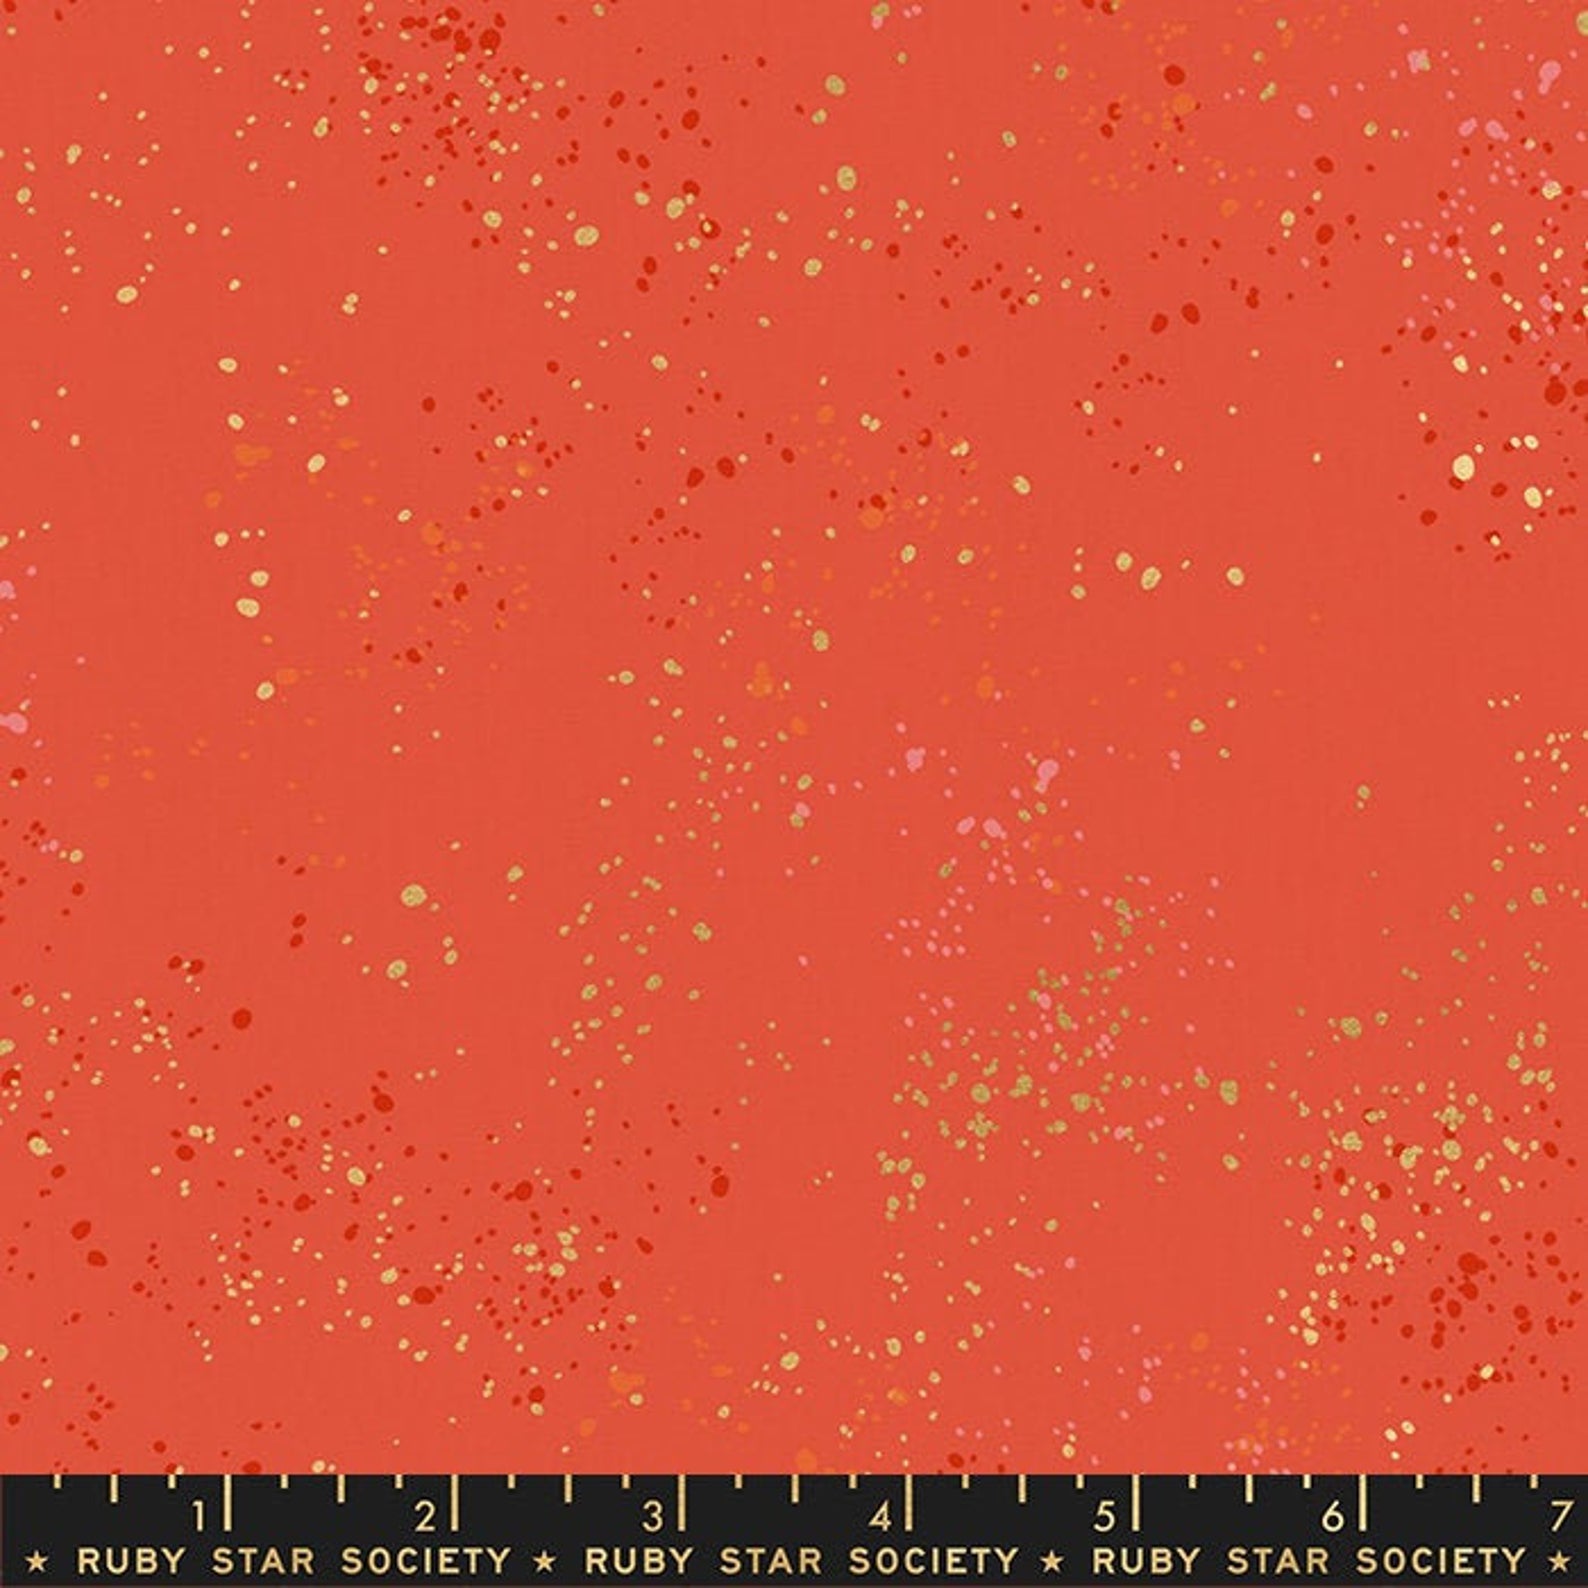 Manufacturer: Ruby Star Society Designer: Rashida Coleman Hale Collection: Speckled Print Name: Speckled Metallic Festive Material: 100% Cotton  Weight: Quilting  SKU: RS5027-75M Width: 44 inches